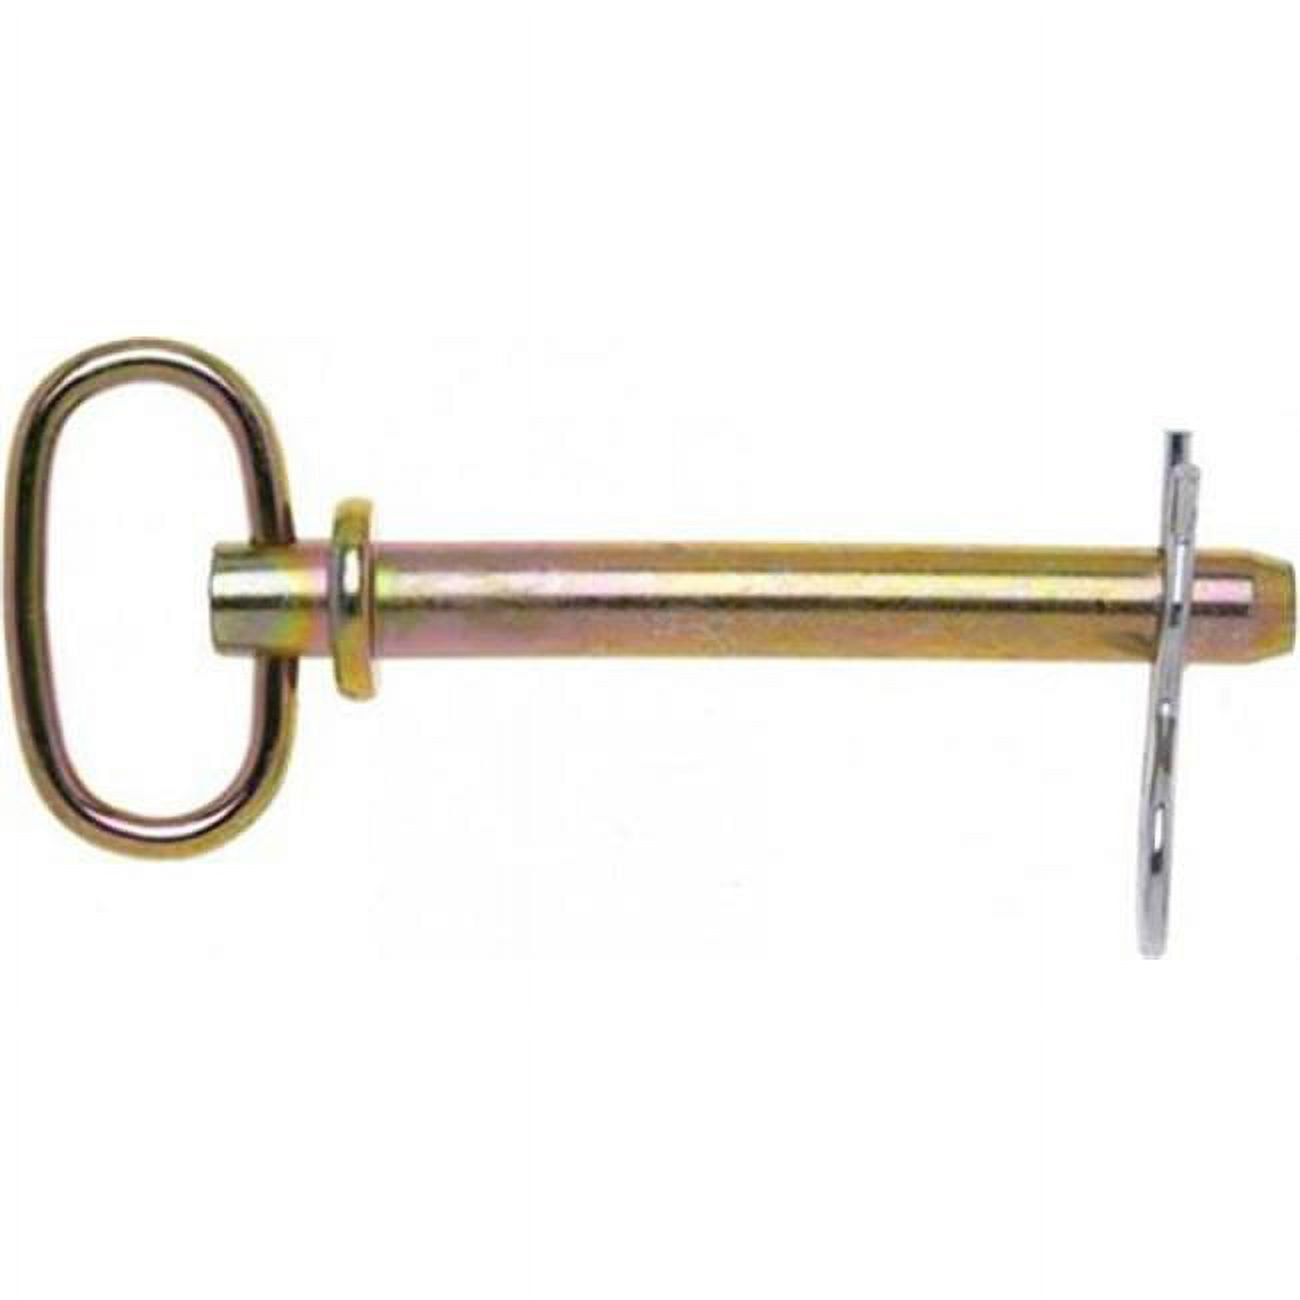 B3899832 0.09 In. Campbell Hitch Pin With Clip, Yellow Zinc Plated - 10 Per Bag